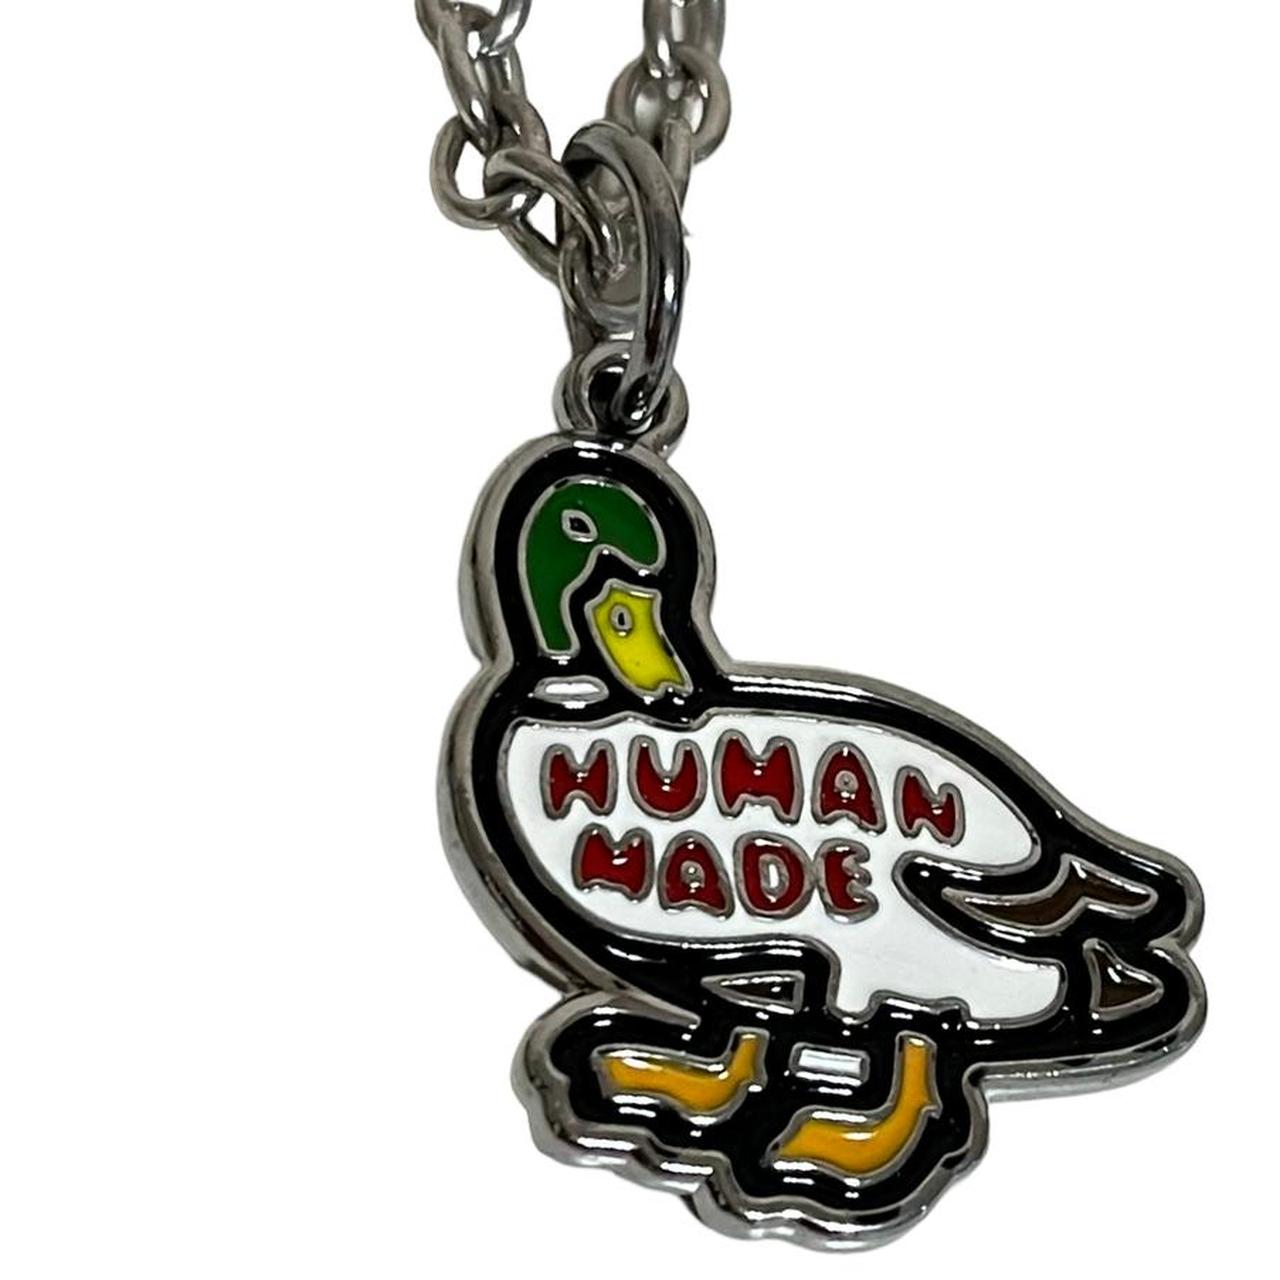 Used human made duck - Gem